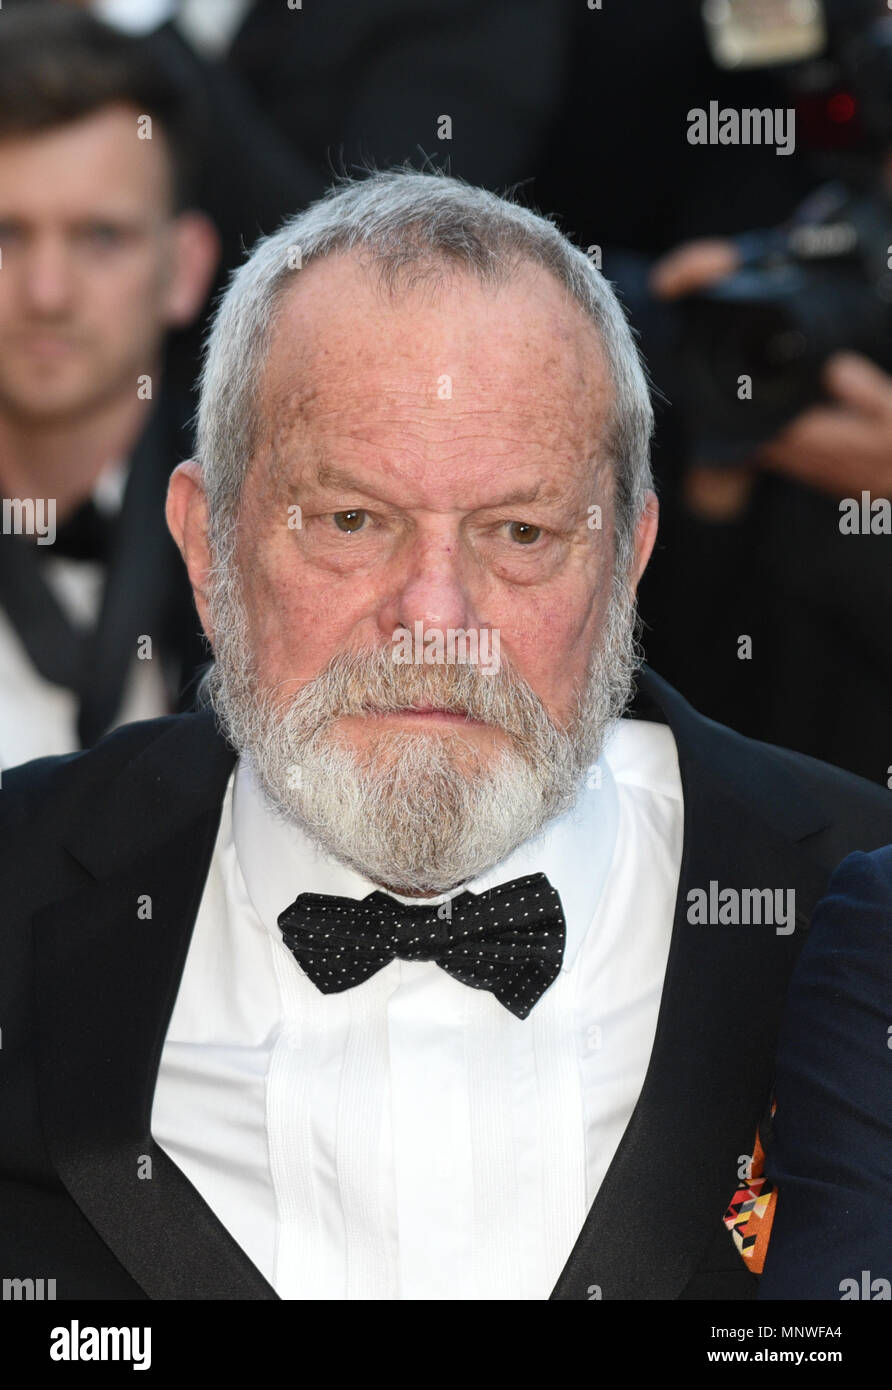 May 19, 2018 - Cannes, France: Terry Gilliam attends the 'Man Who Killed Don Quixote' premiere before the closing ceremony during the 71st Cannes film festival. Stock Photo